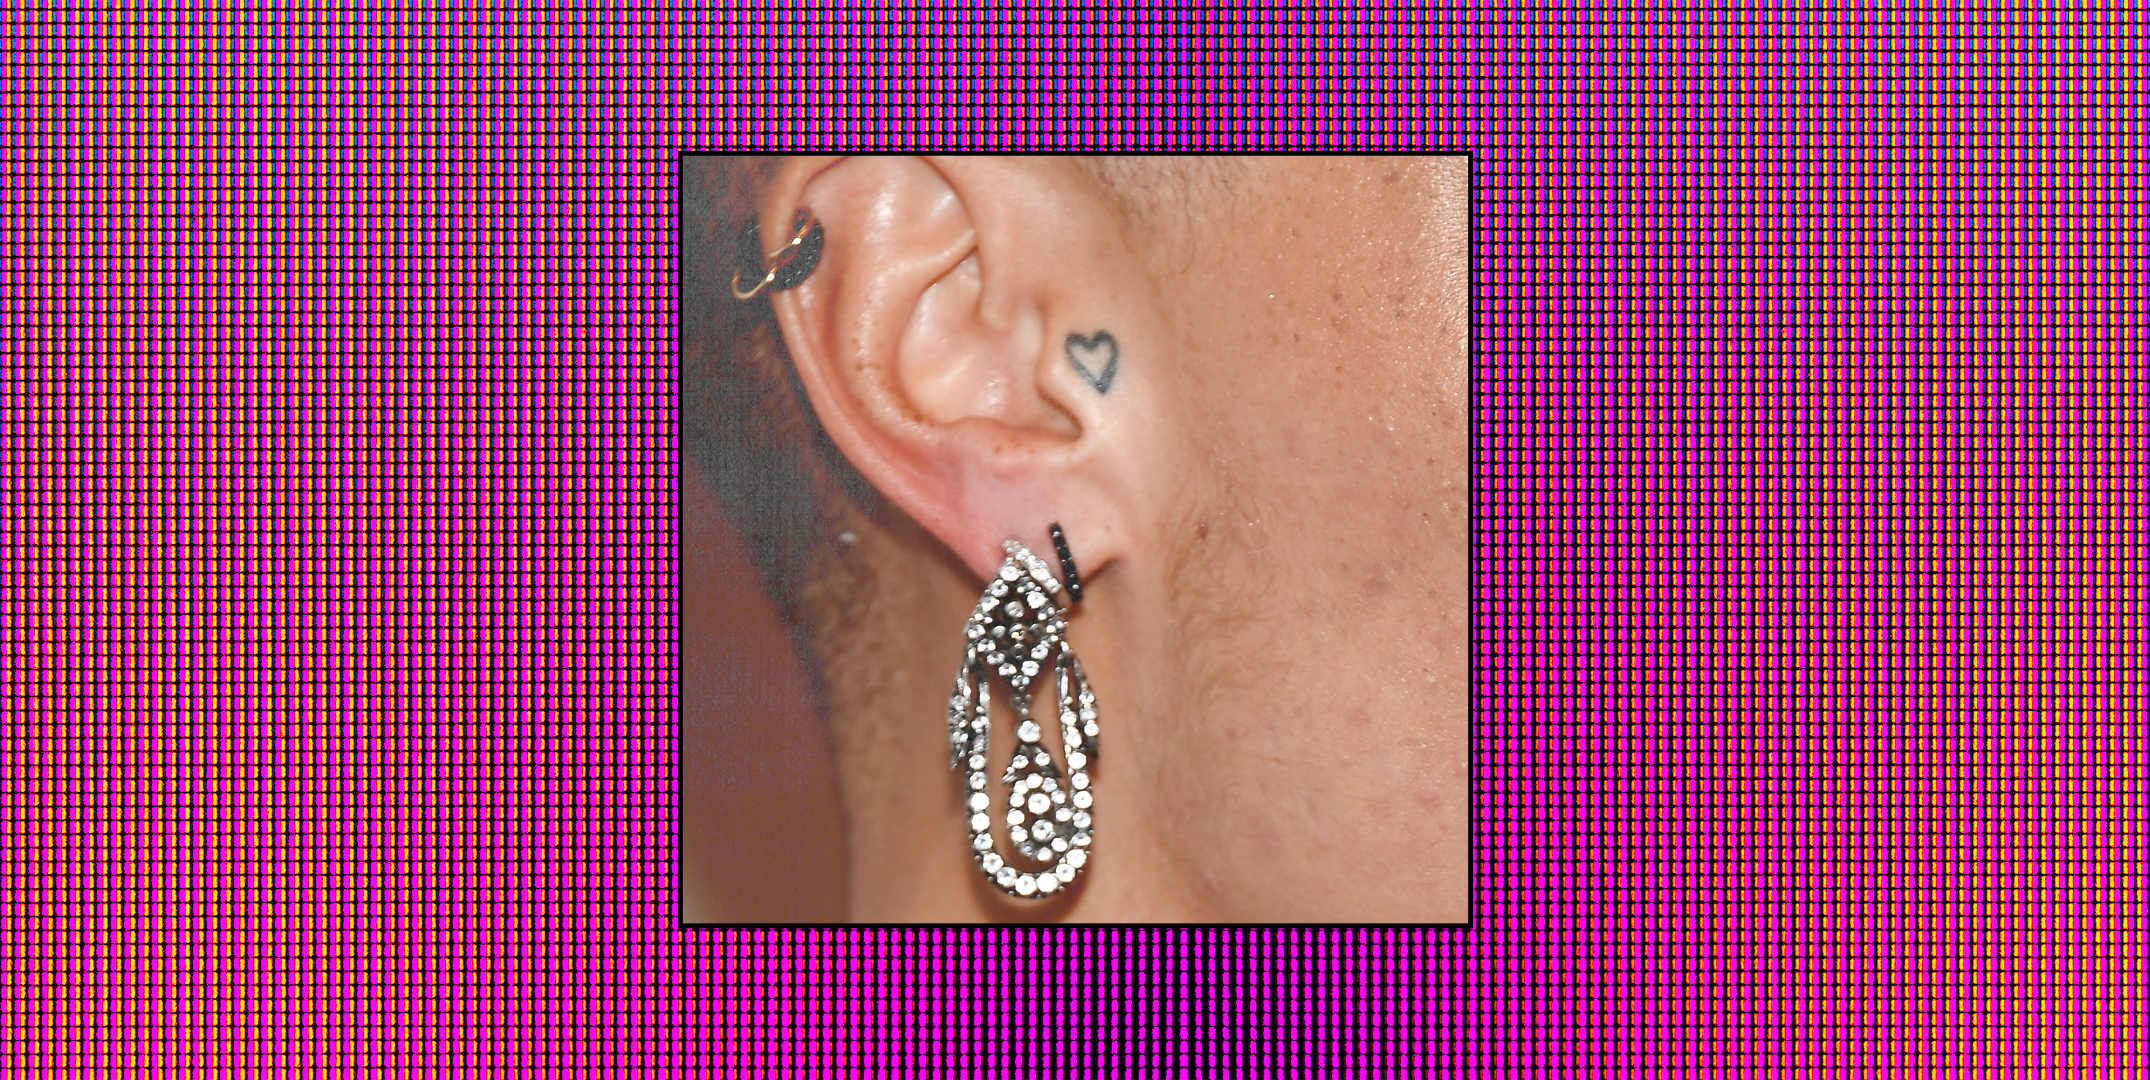 Ditch the earrings, get a Helix Tattoo